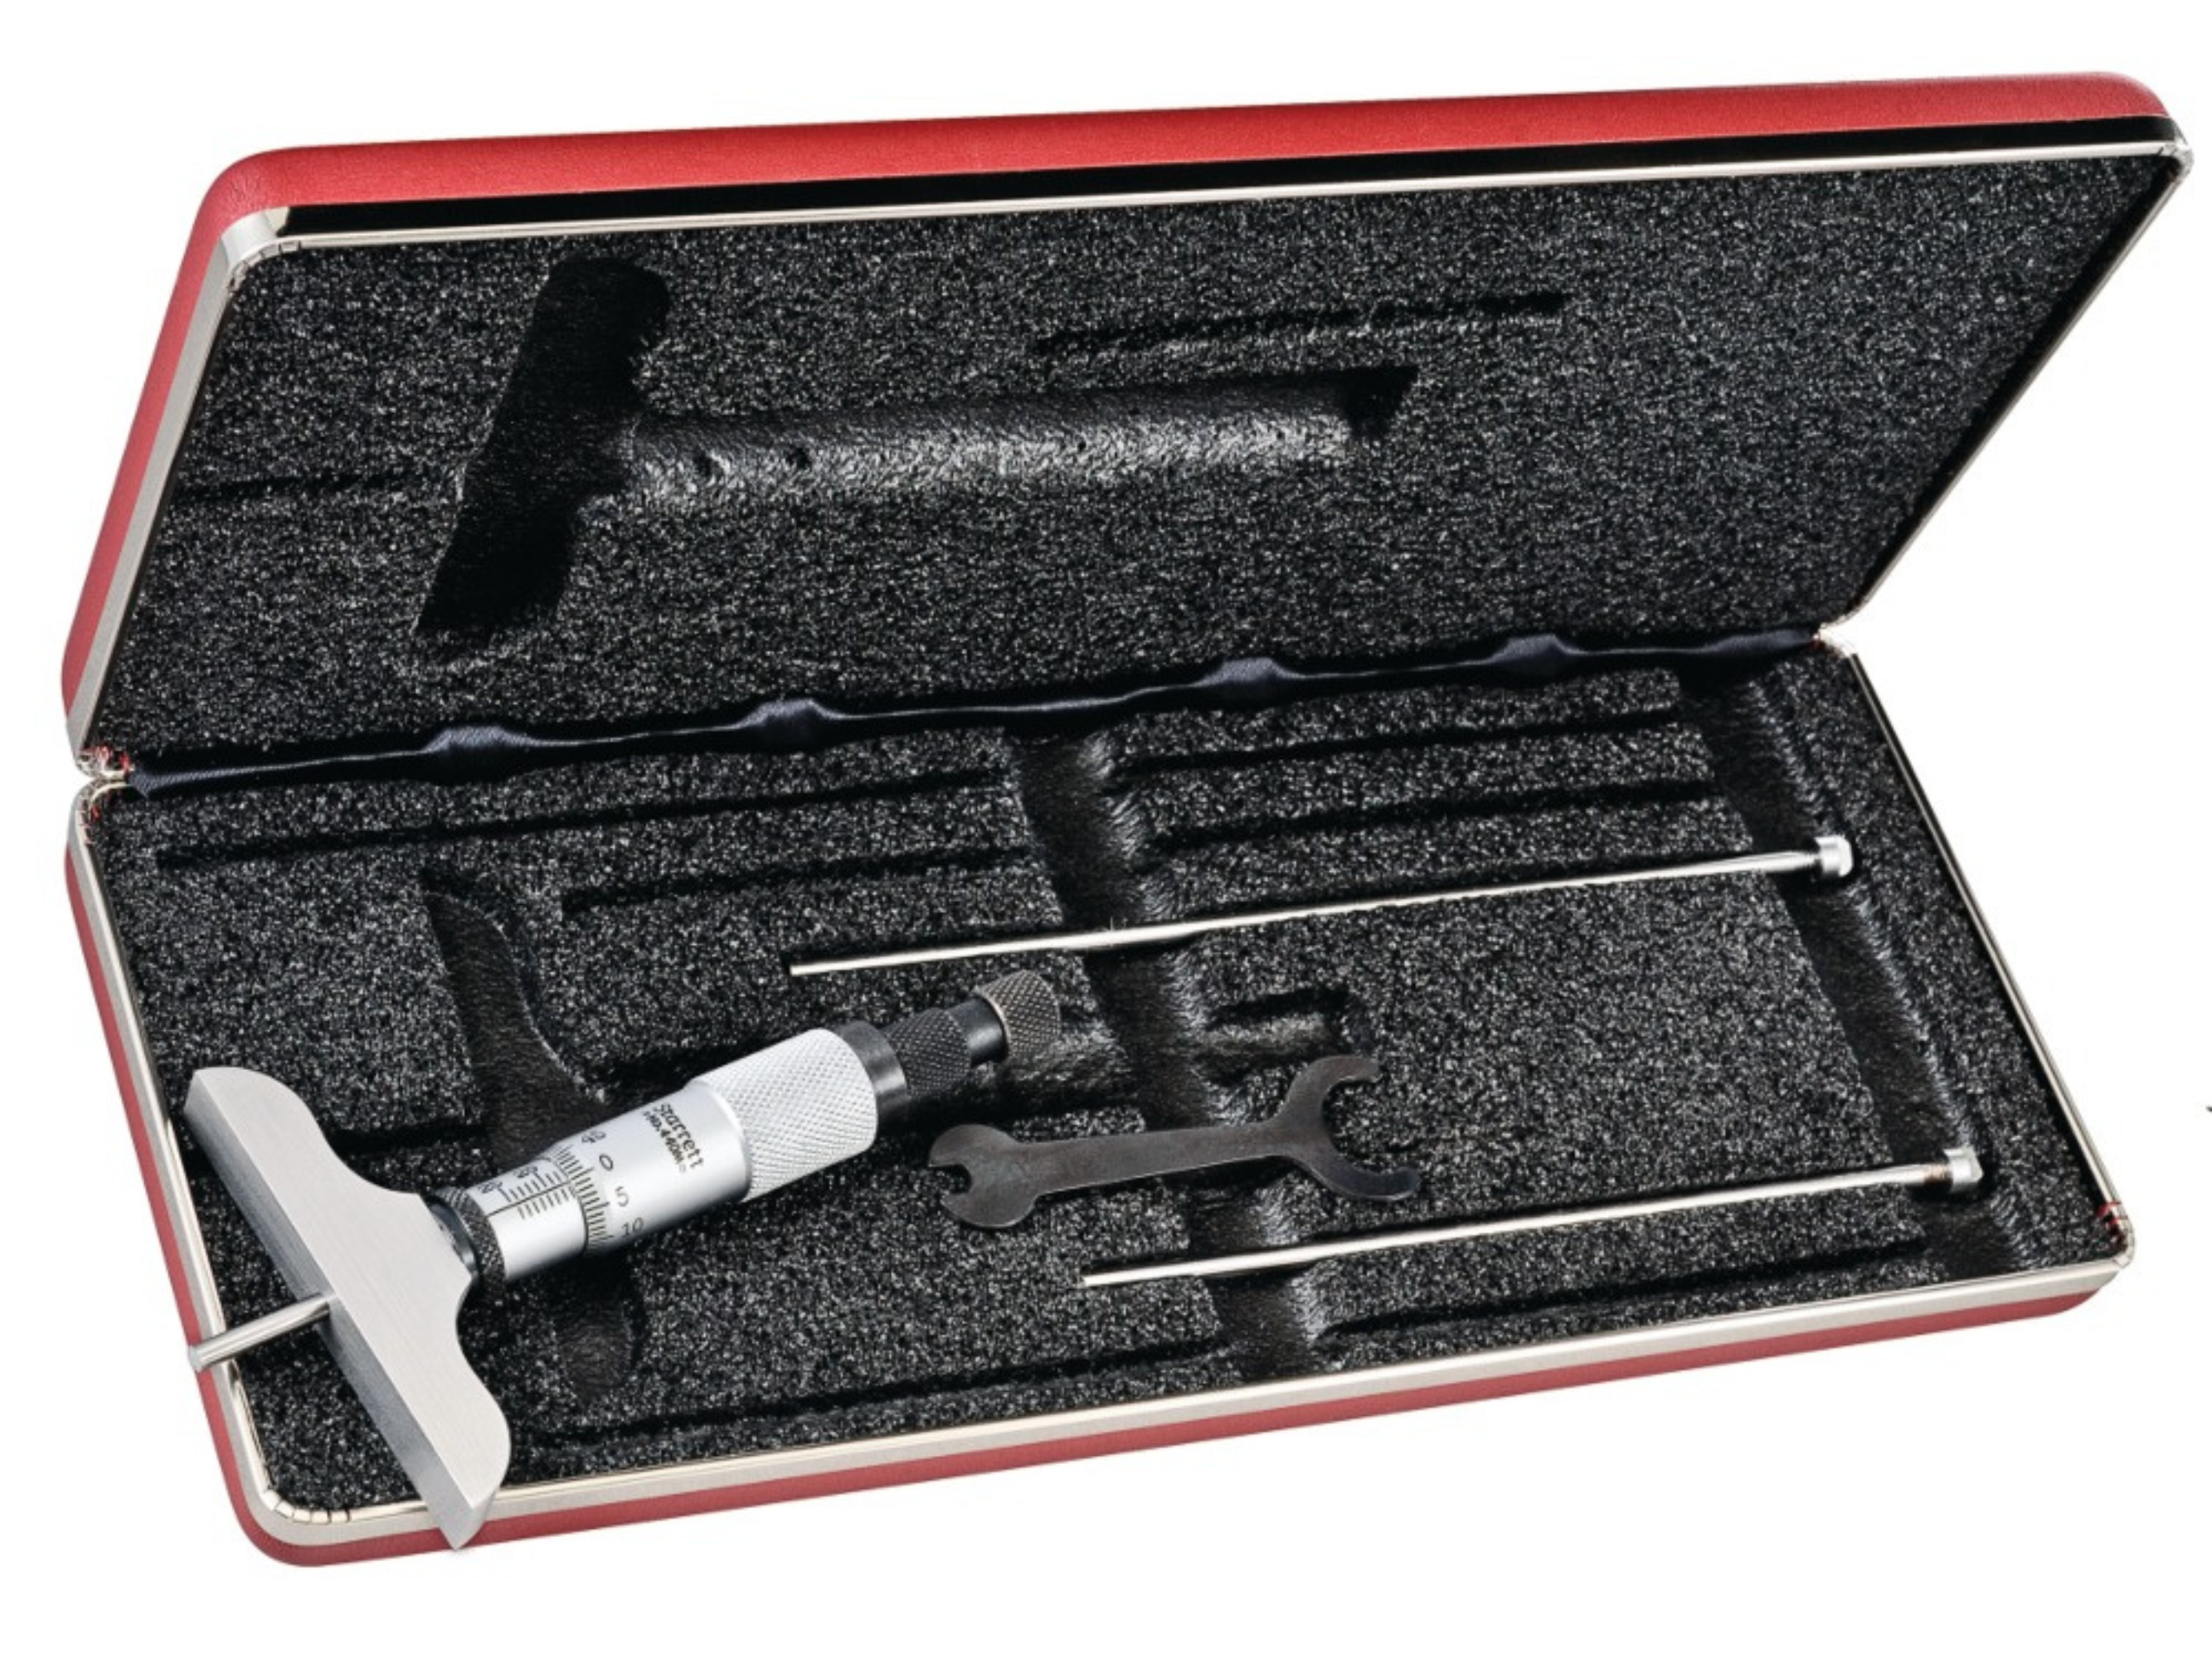 Warehouse Clearance Item: Depth Micrometer 0-150mm